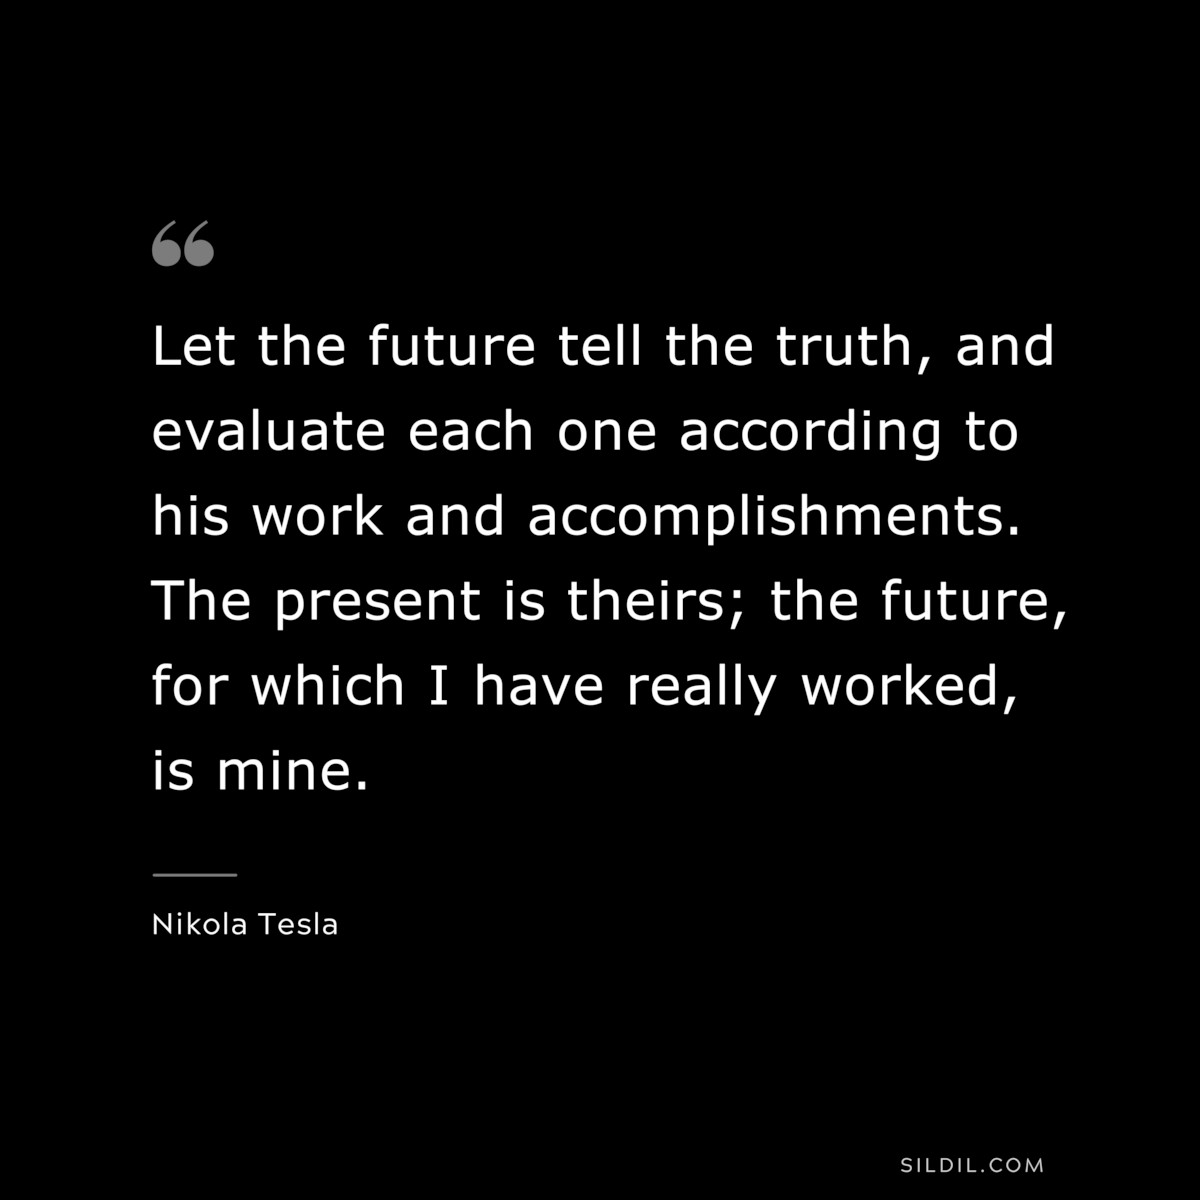 Let the future tell the truth, and evaluate each one according to his work and accomplishments. The present is theirs; the future, for which I have really worked, is mine. ― Nikola Tesla